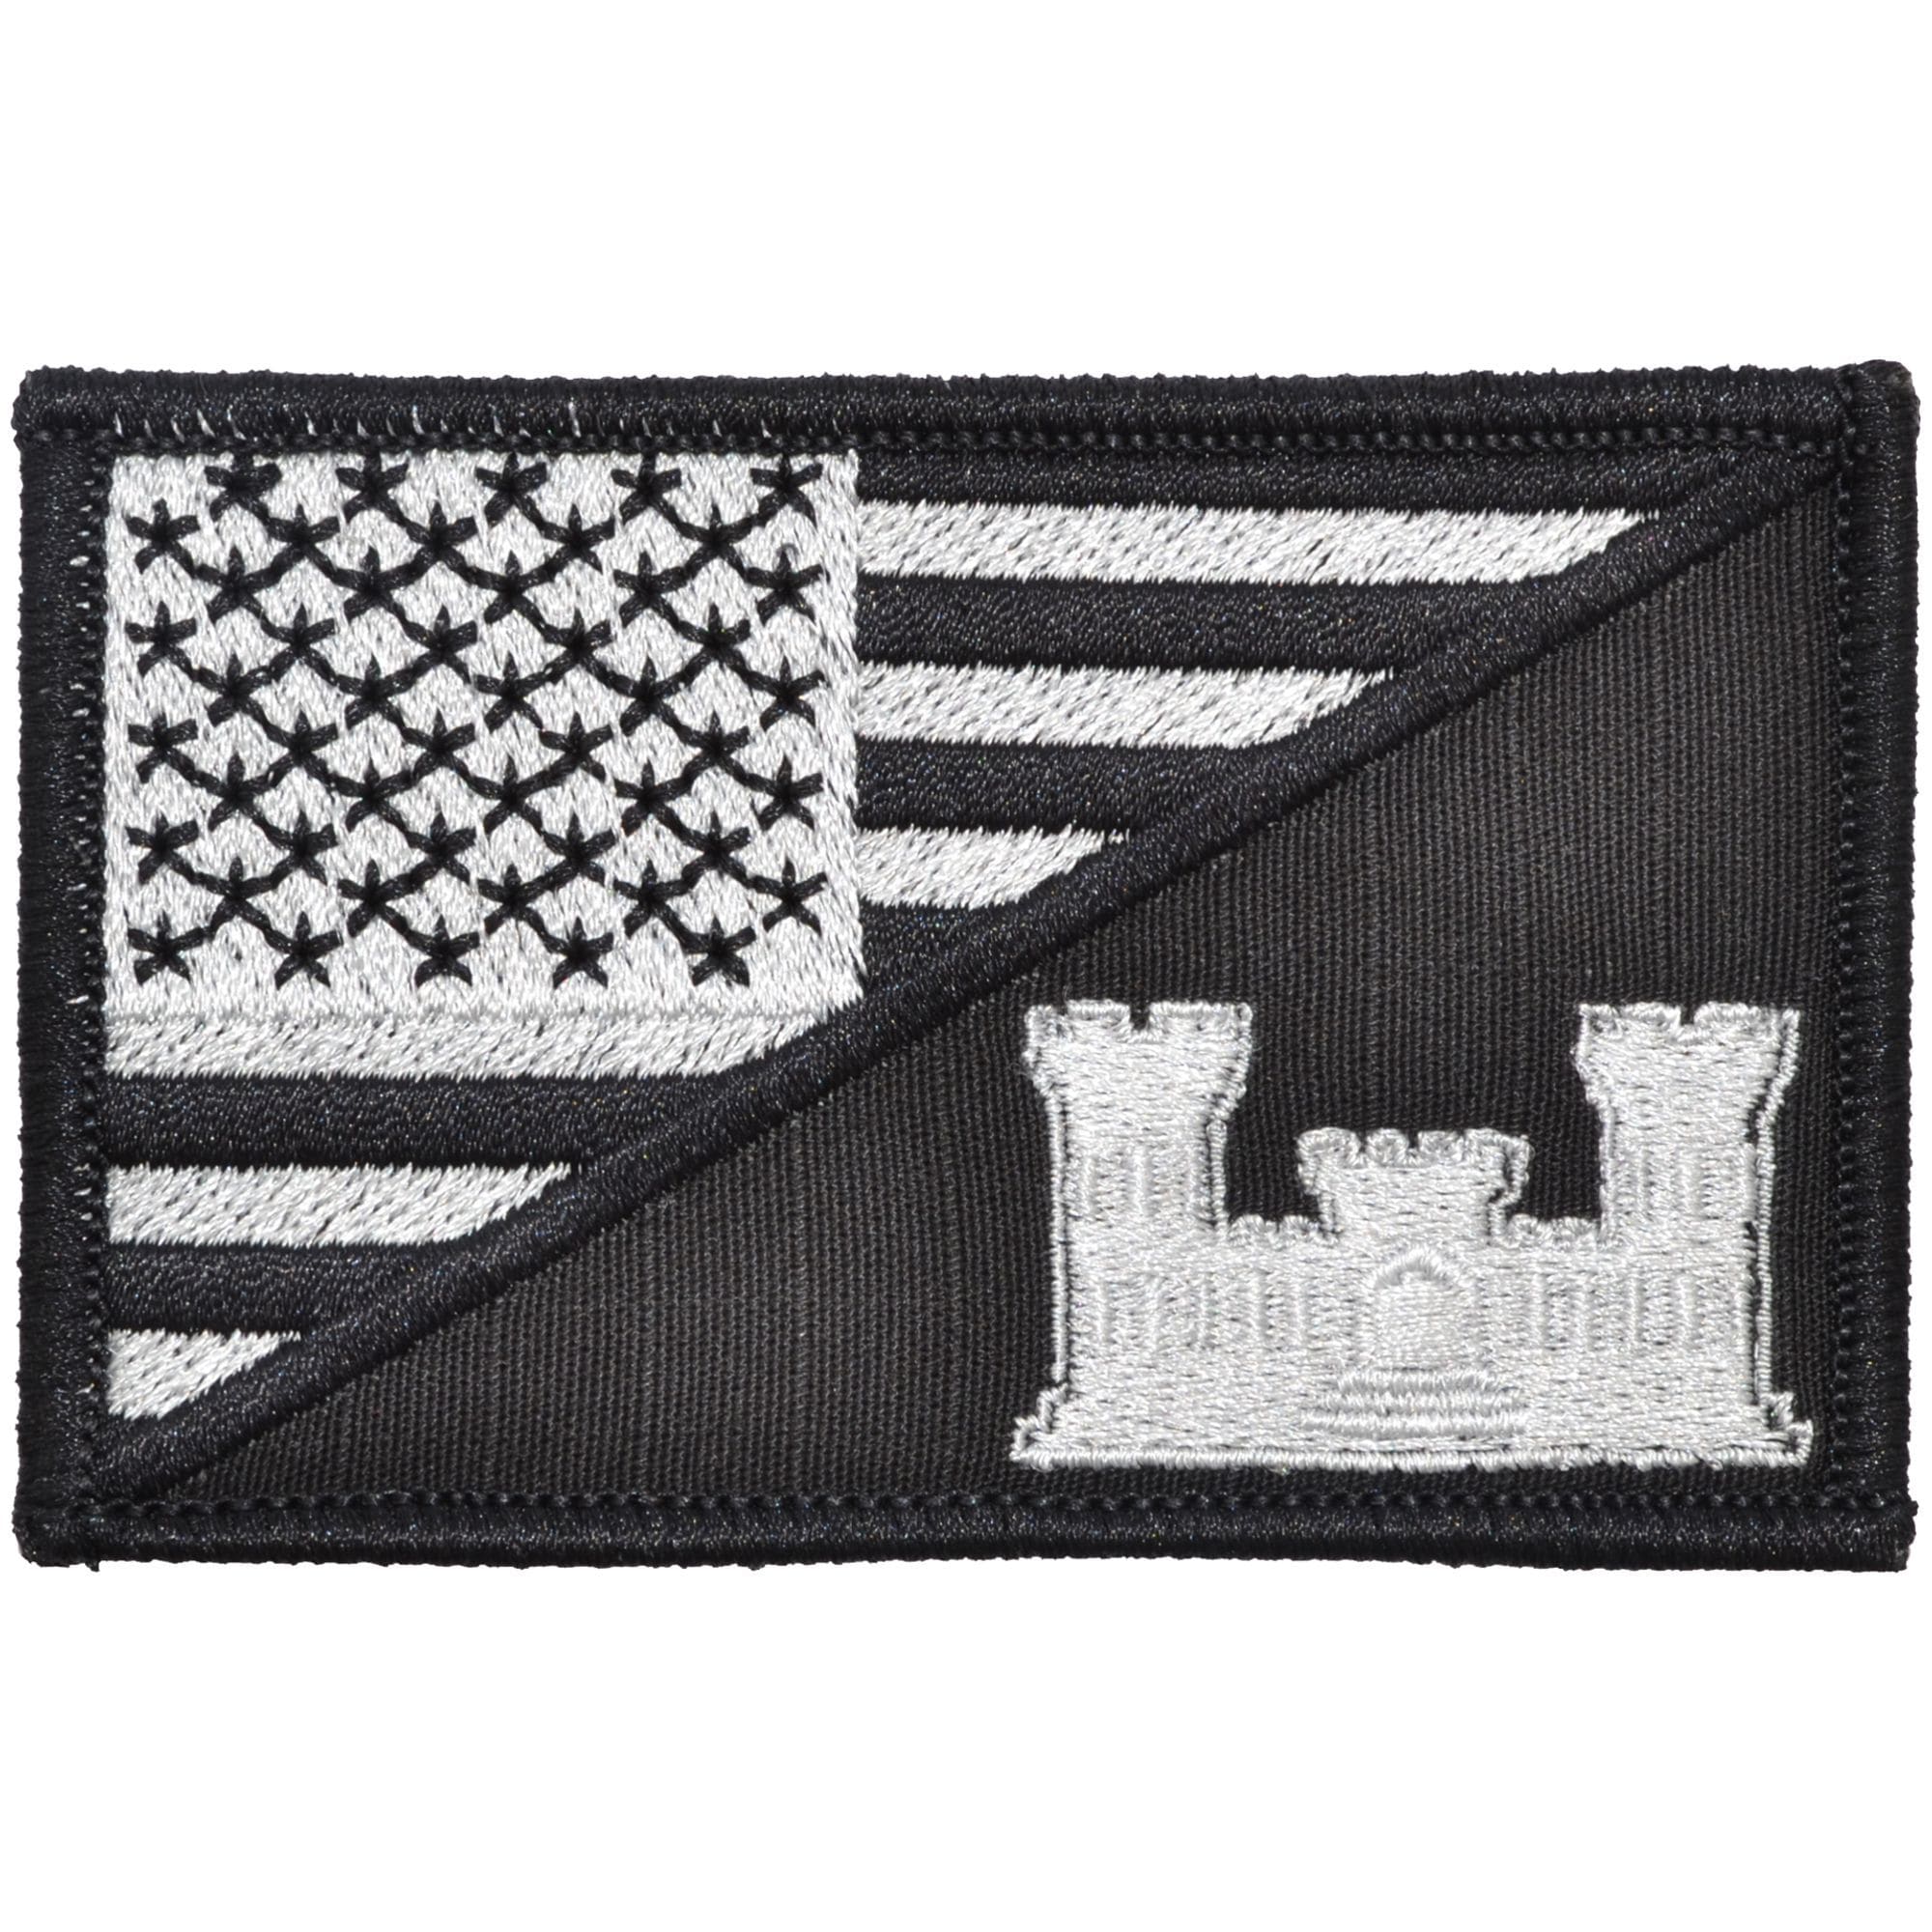 Tactical Gear Junkie Patches Black Army Engineer Castle USA Flag - 2.25x3.5 Patch